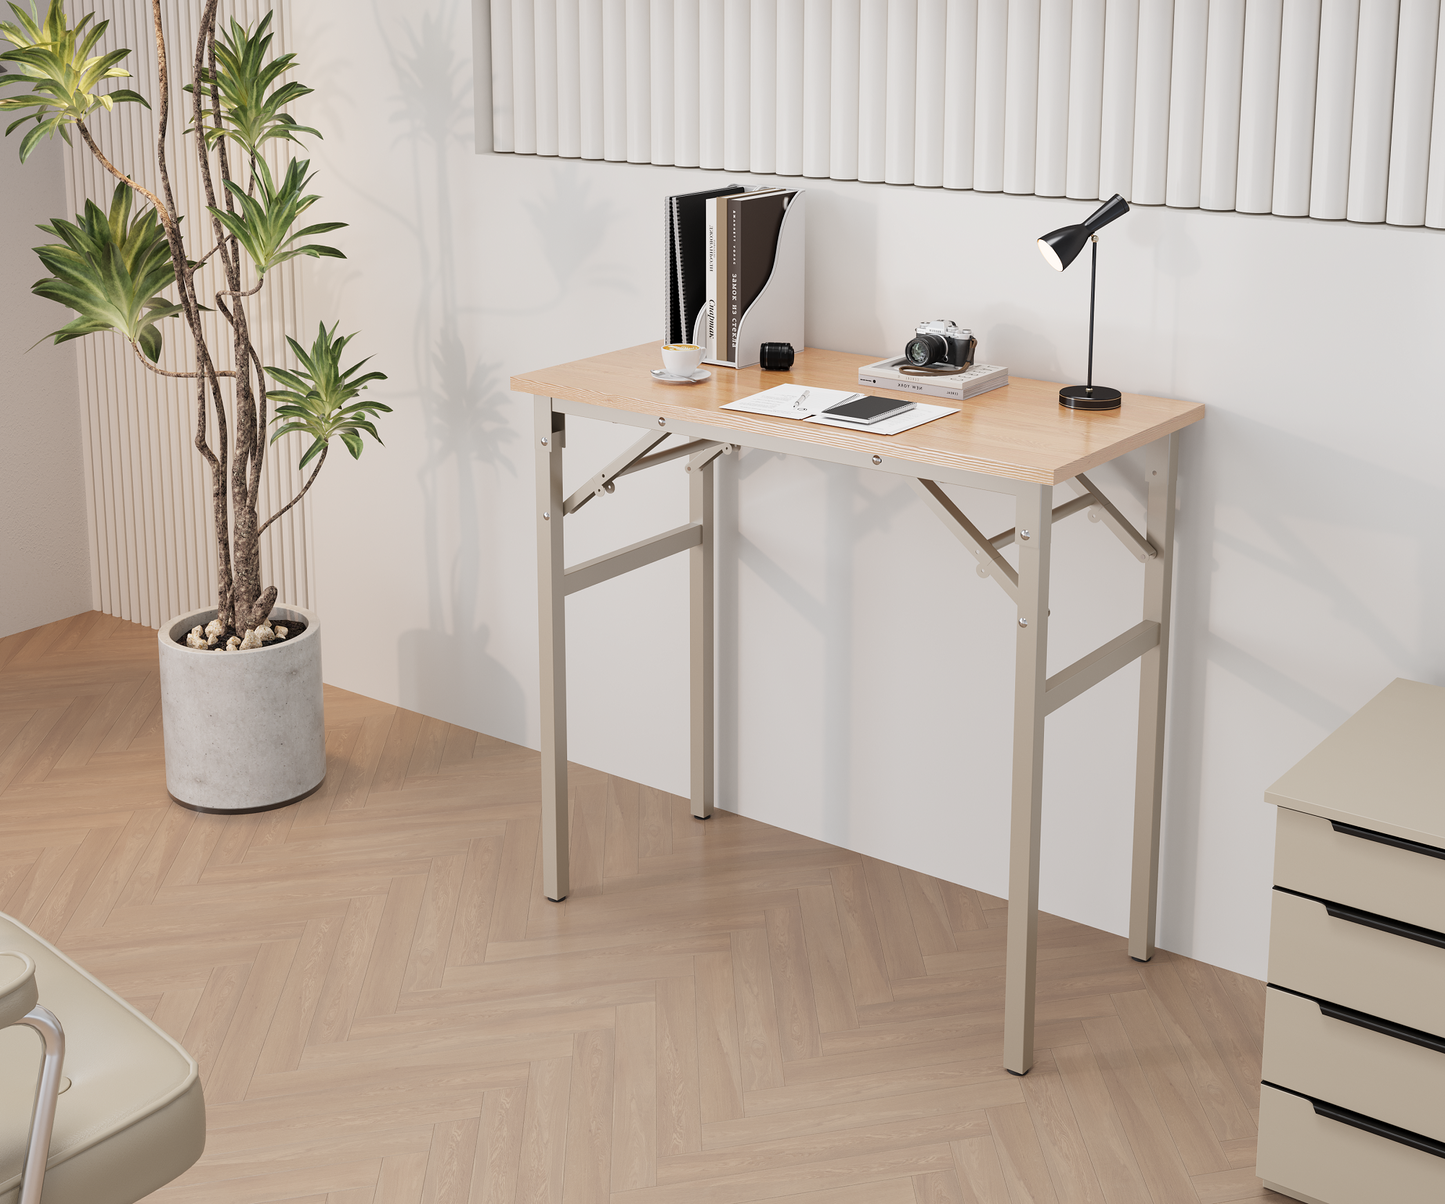 Folding Table Desk: 47x24 Inches Computer Workstation, No Install, Creamy White